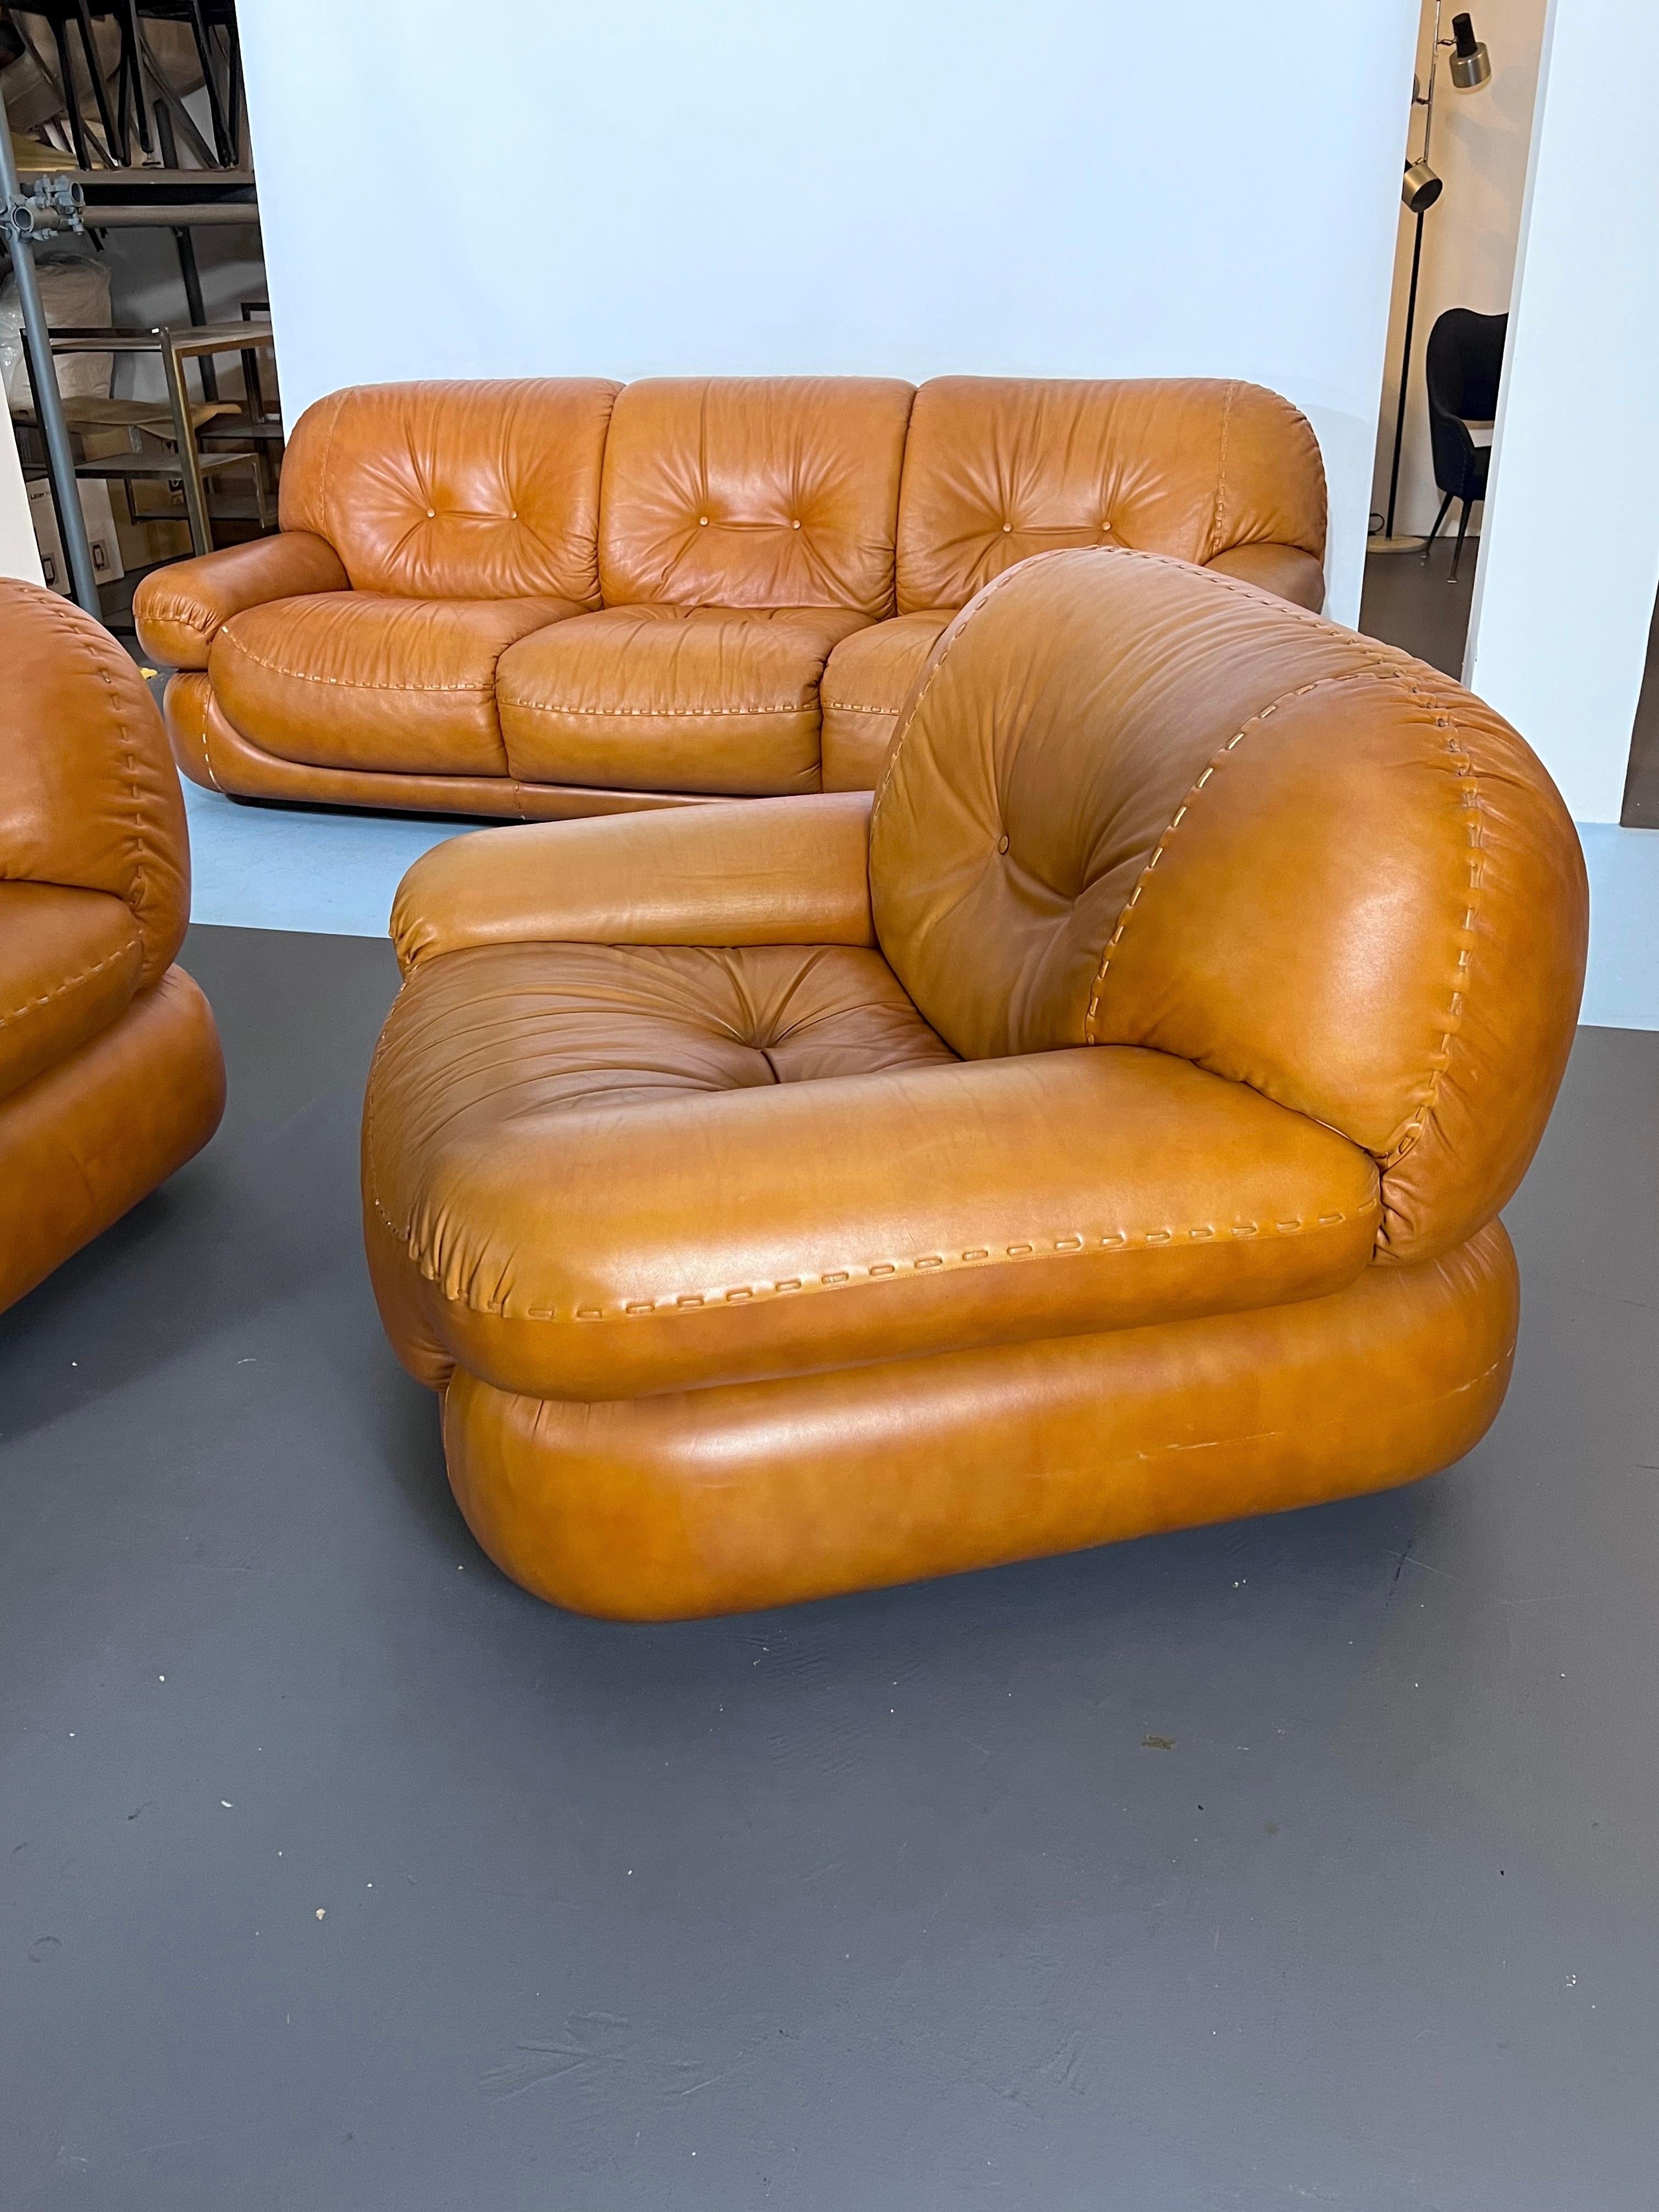 Vintage Sofa Set in Cognac Leather by Sapporo for Mobil Girgi, Italy, 1970s For Sale 1